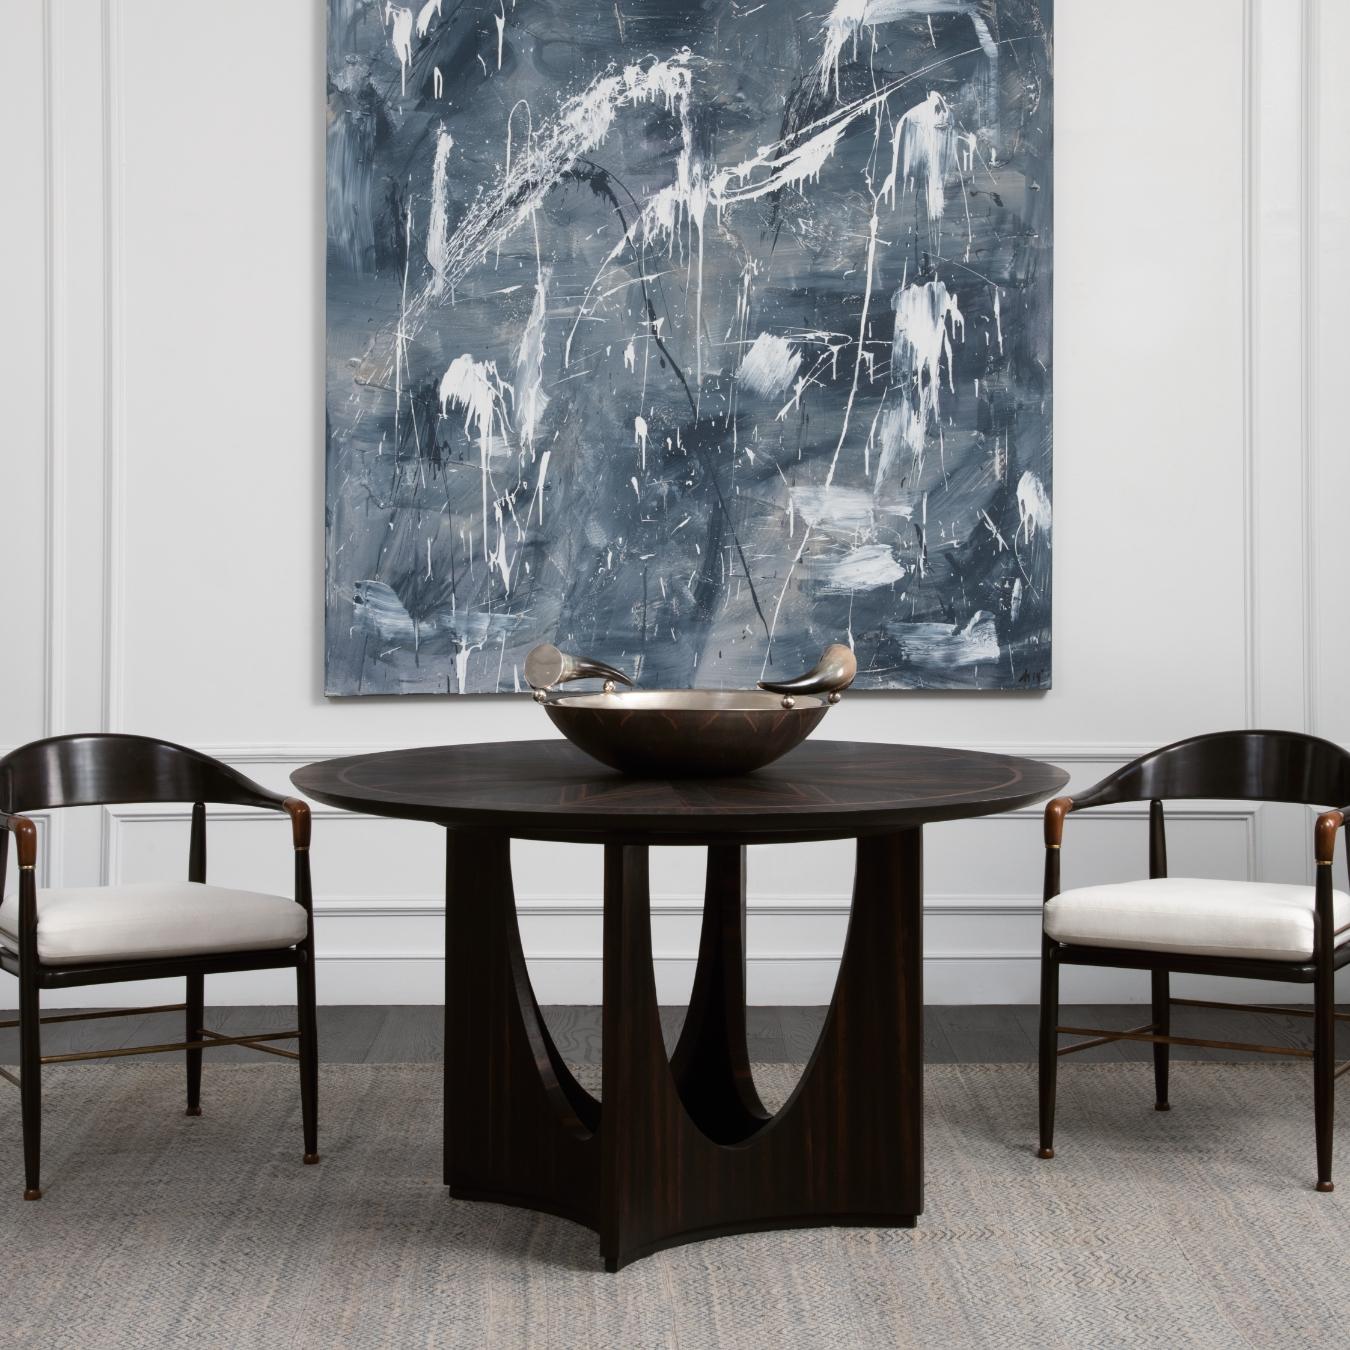 Mexican Art Deco Inspired Wood Belleuve 140 Dining Table with Ebony Veneer